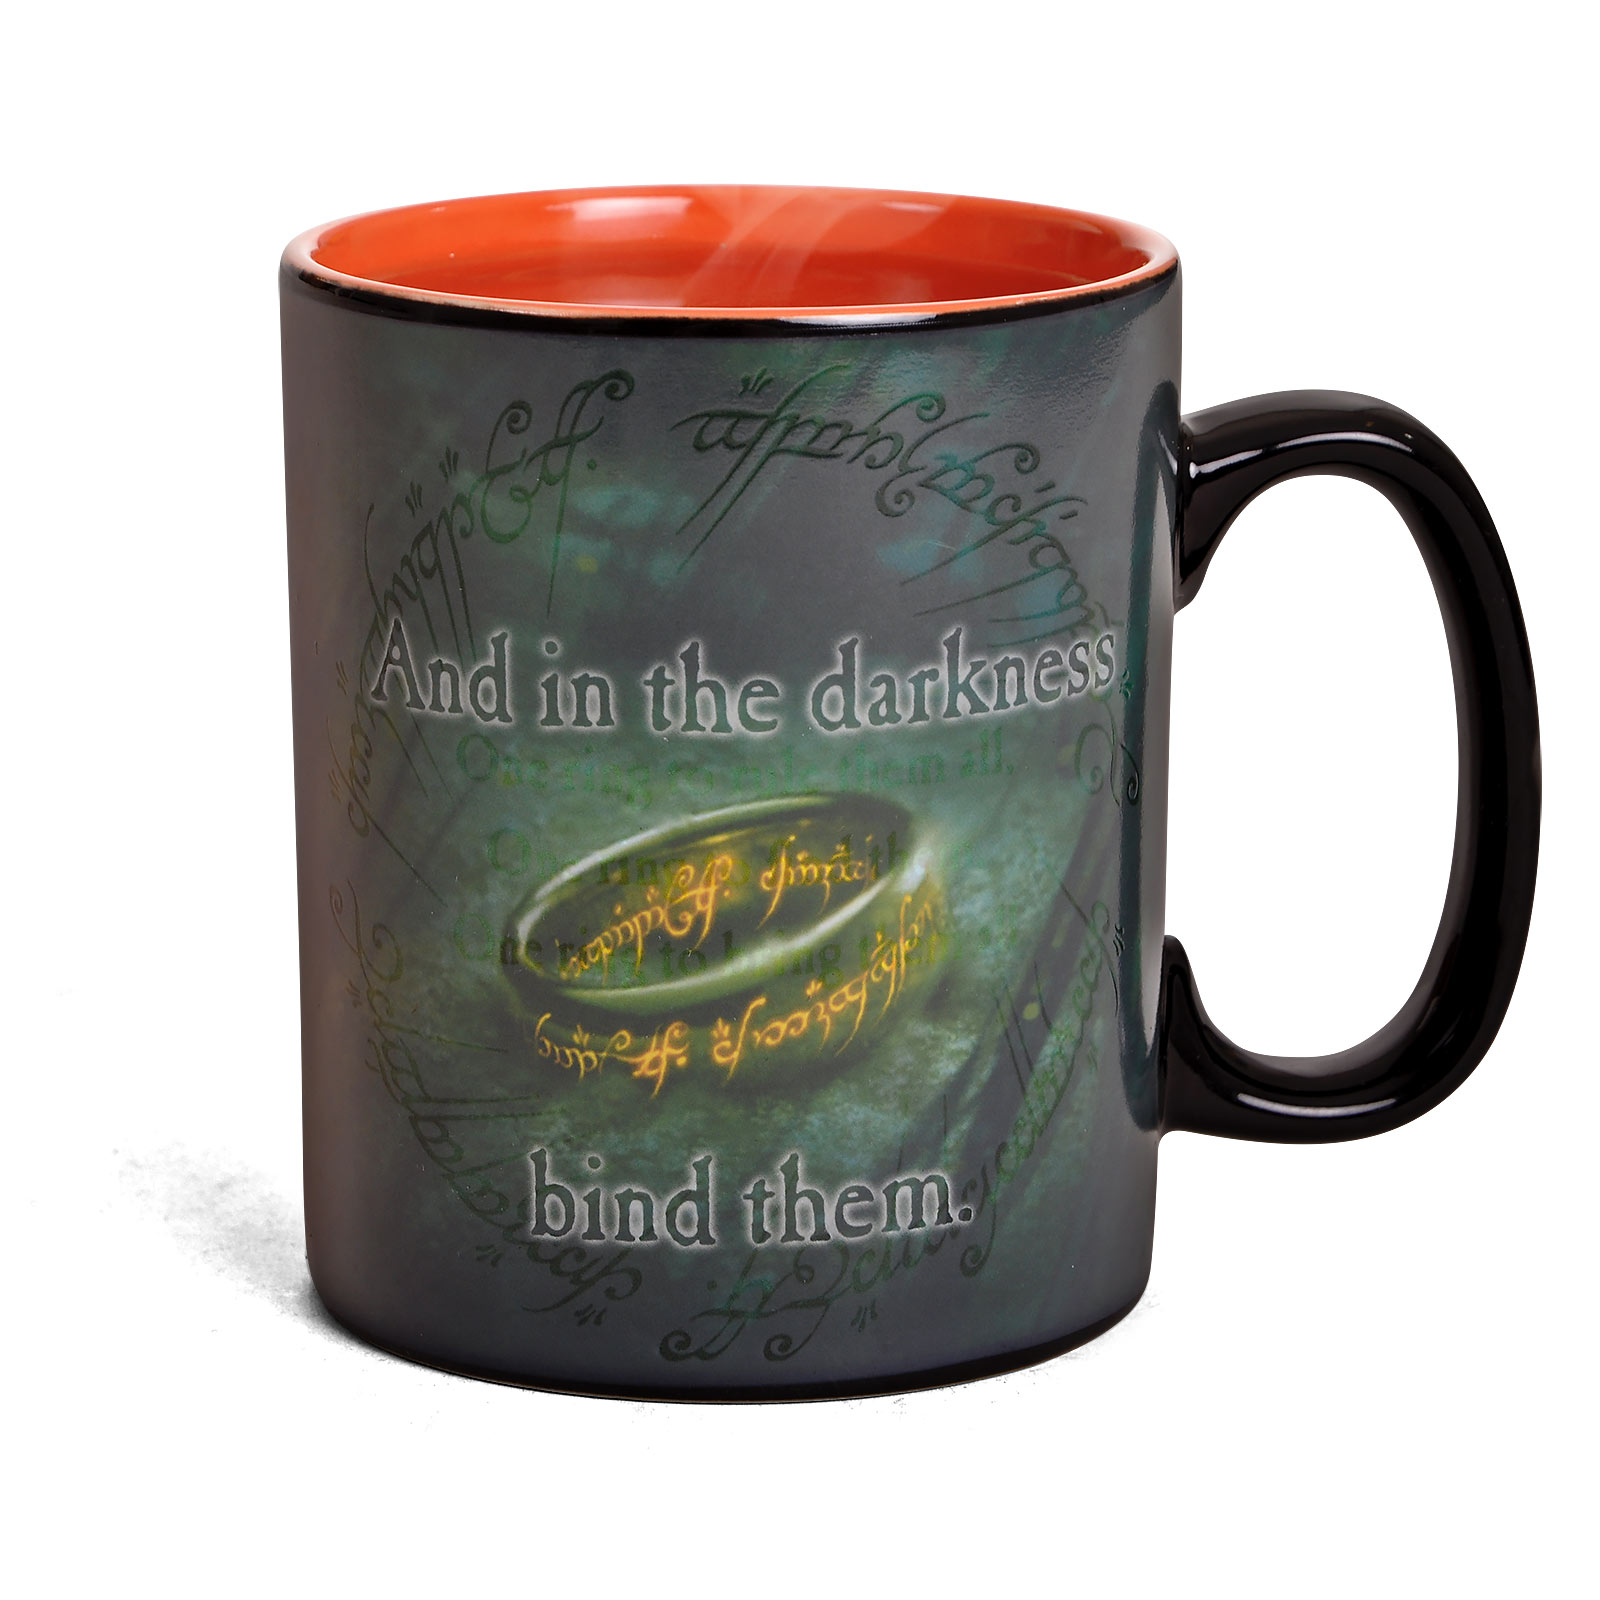 Lord of the Rings - Sauron's Ring Thermoeffect Mug